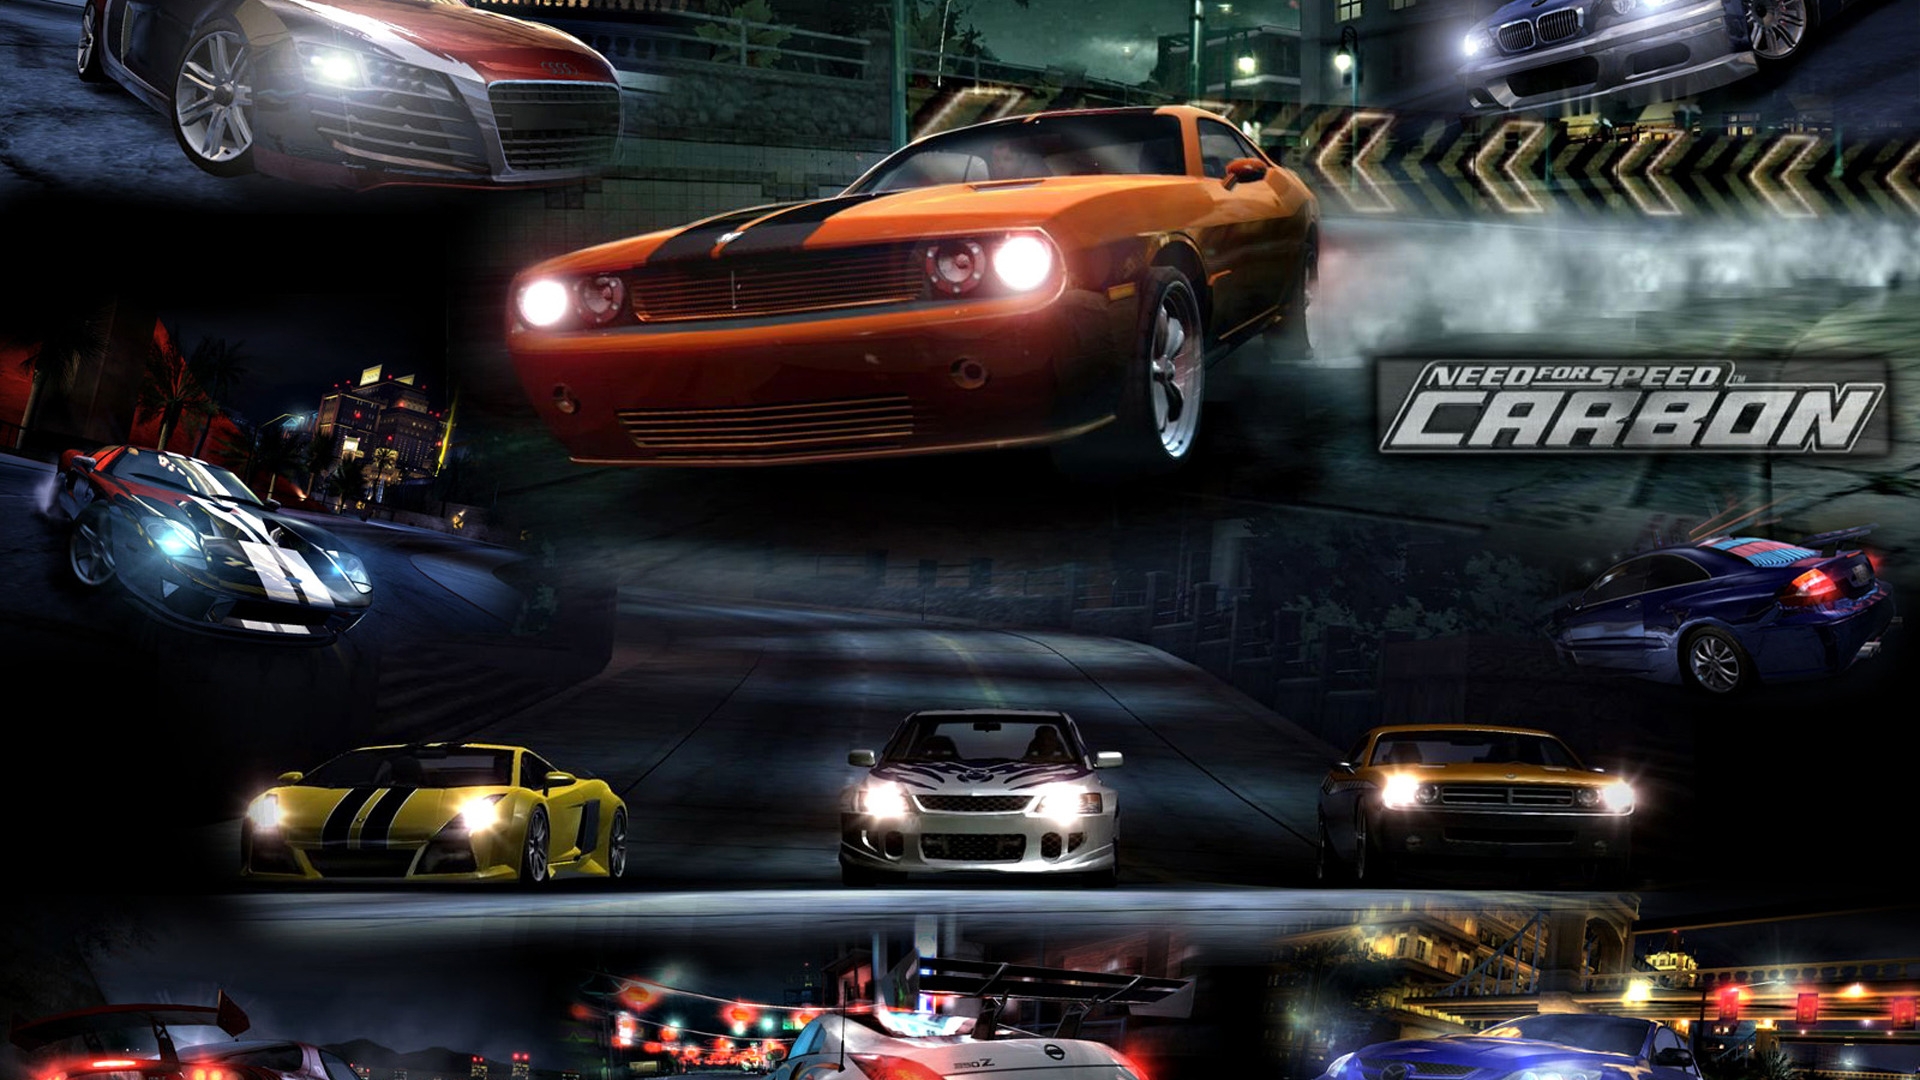 NFS Carbon for 1920 x 1080 HDTV 1080p resolution